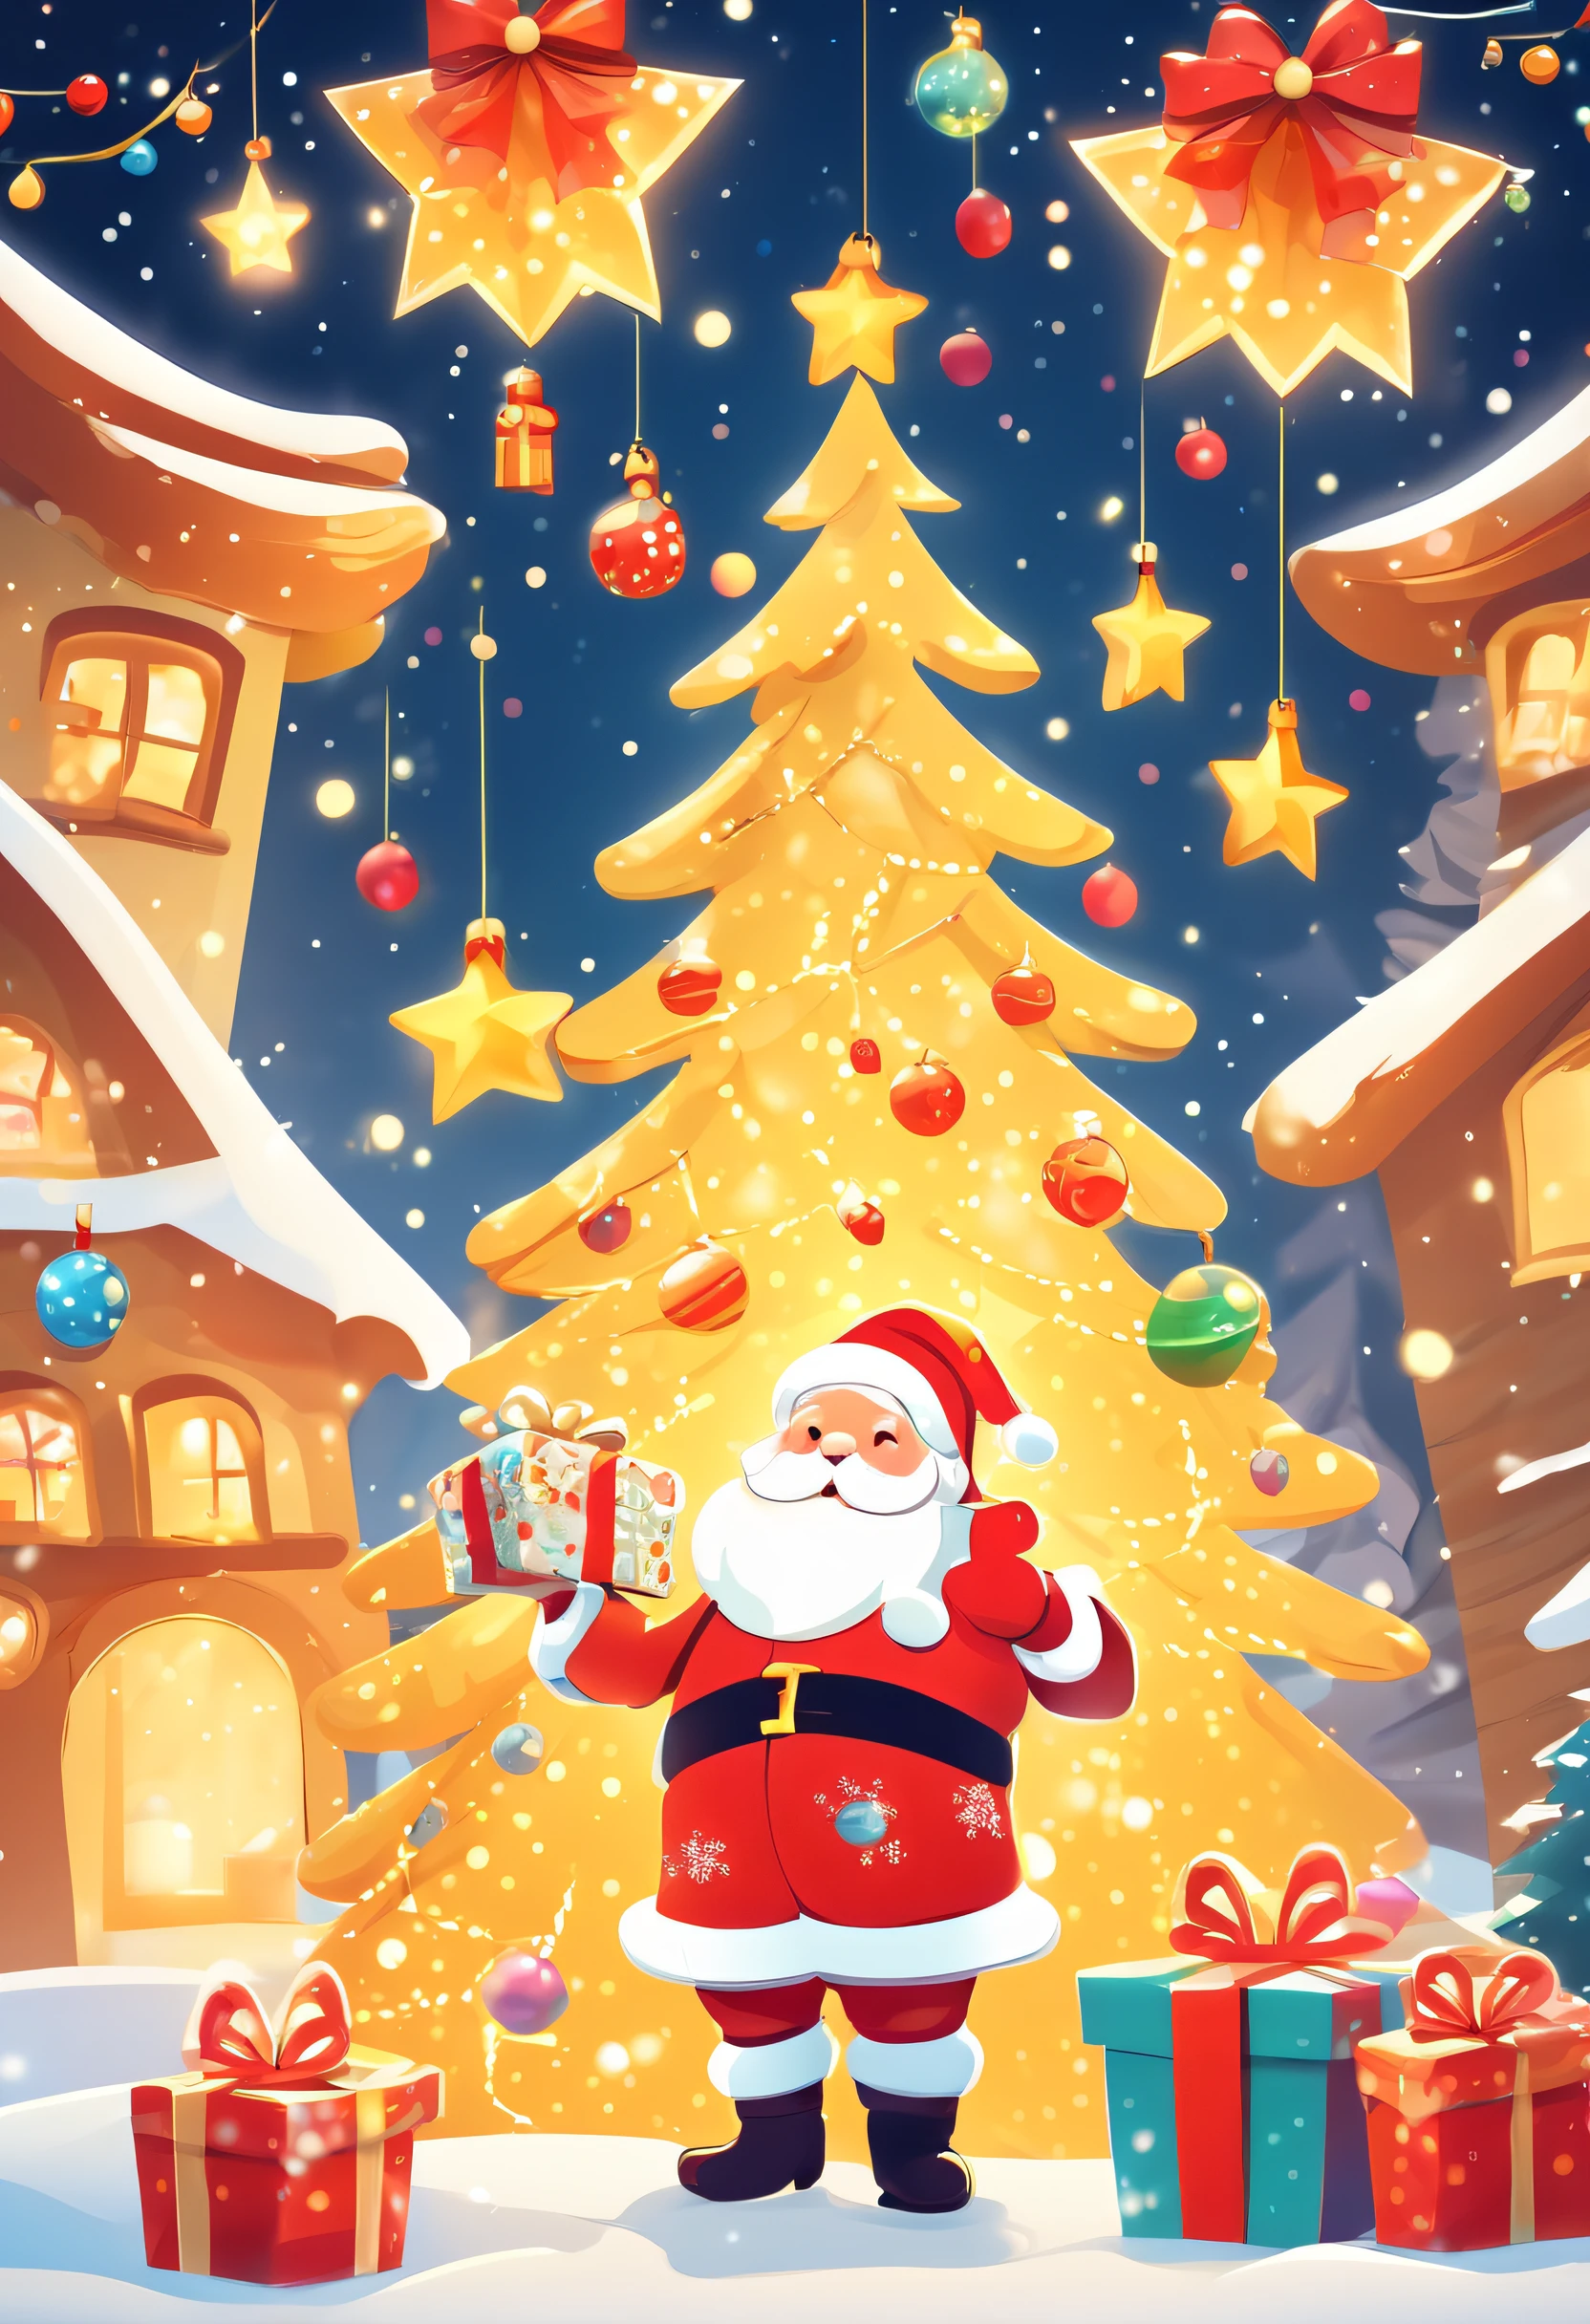 3 Rendering, christmas eve scene, There is a big Christmas tree in the middle of the poster, Decorate with colorful lights, star curtain in sky, and gift box on the snow. Cute and kind Santa Claus holding gifts, warm yellow background and bright night